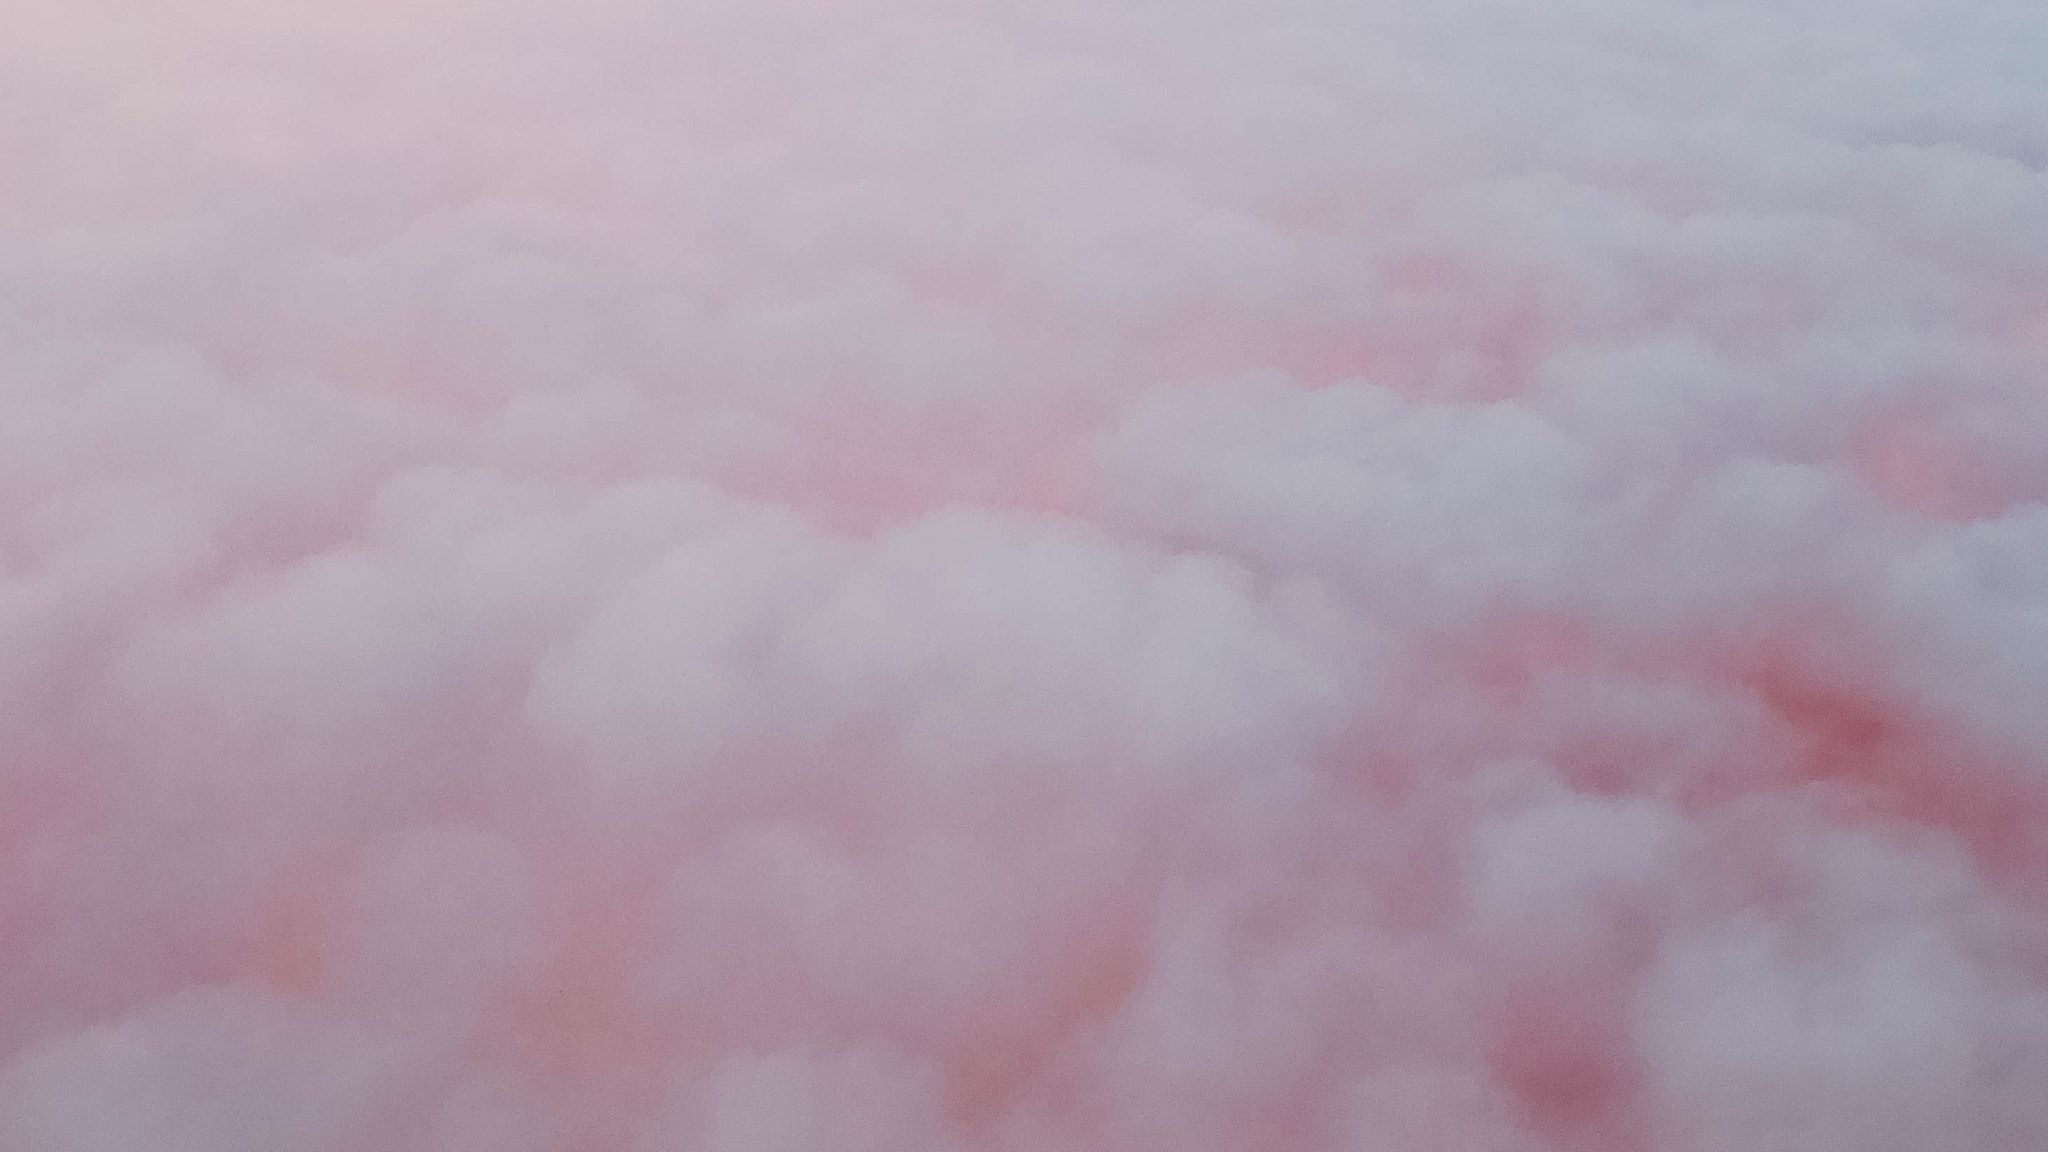 White clouds wallpaper, cotton candy, pink, sky, colorful, pastel, blue • Wallpaper For You HD Wallpaper For Desktop & Mobile